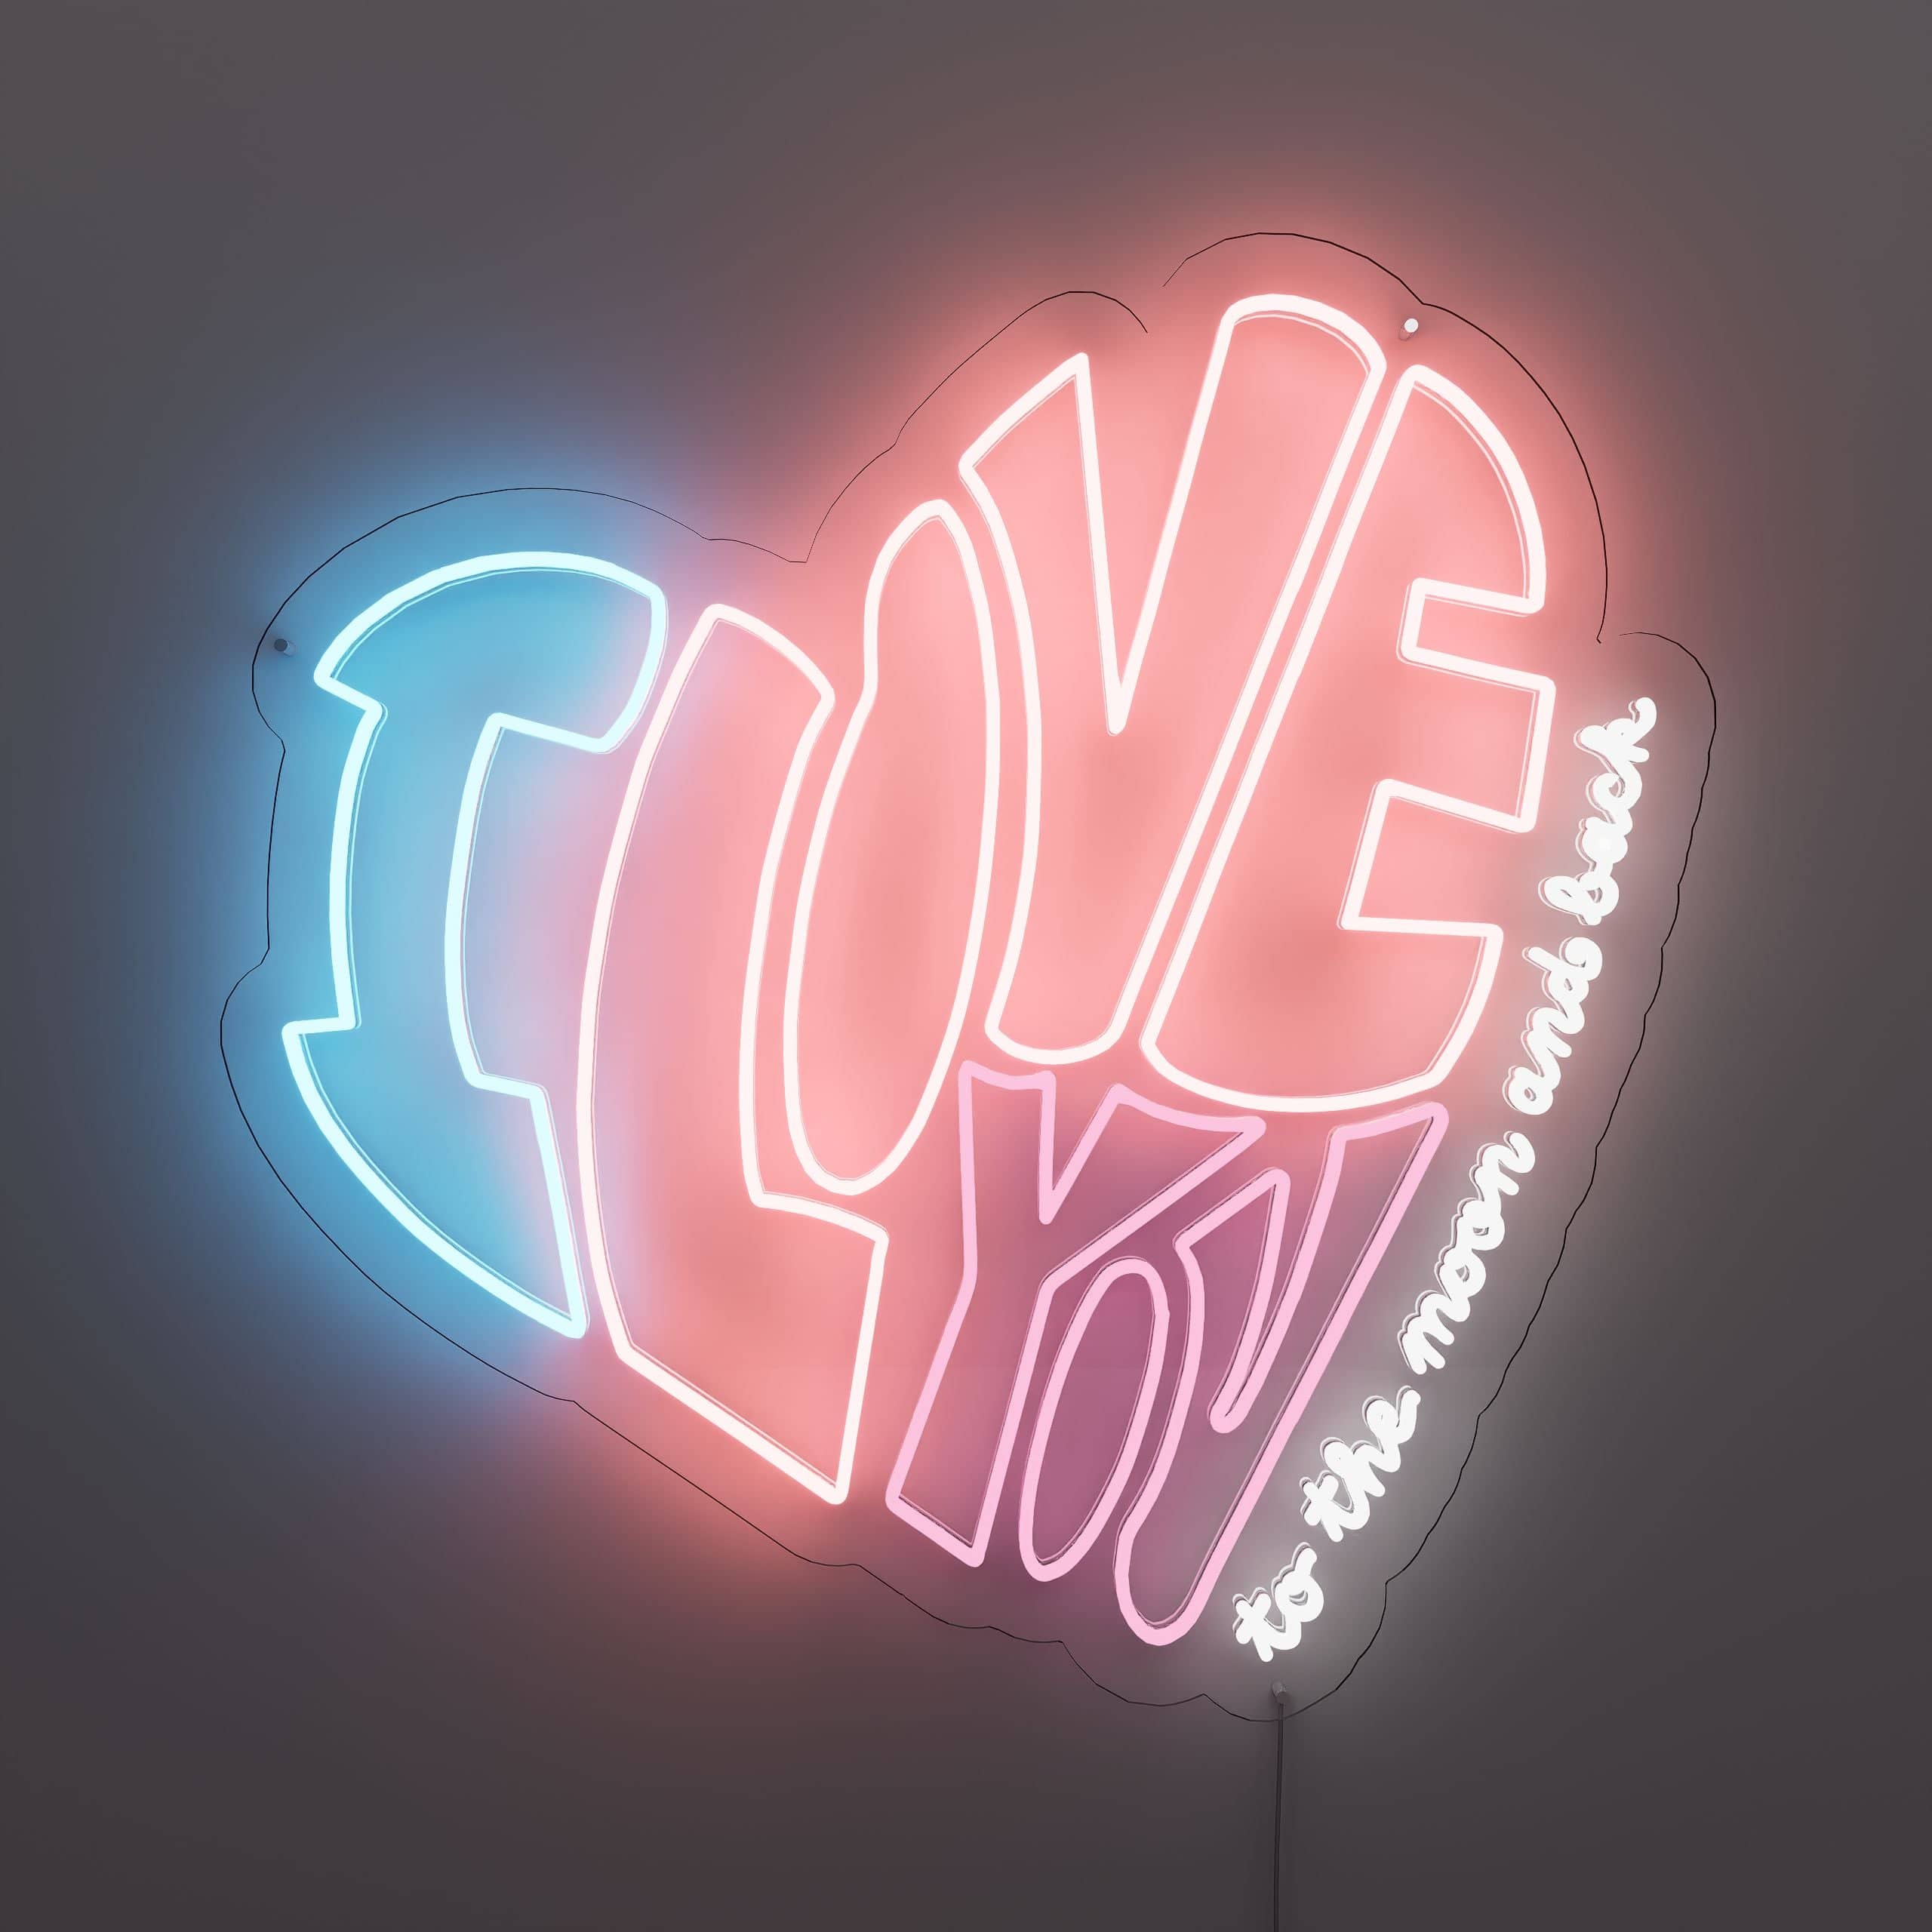 Love you heart neon sign adds warmth to living rooms